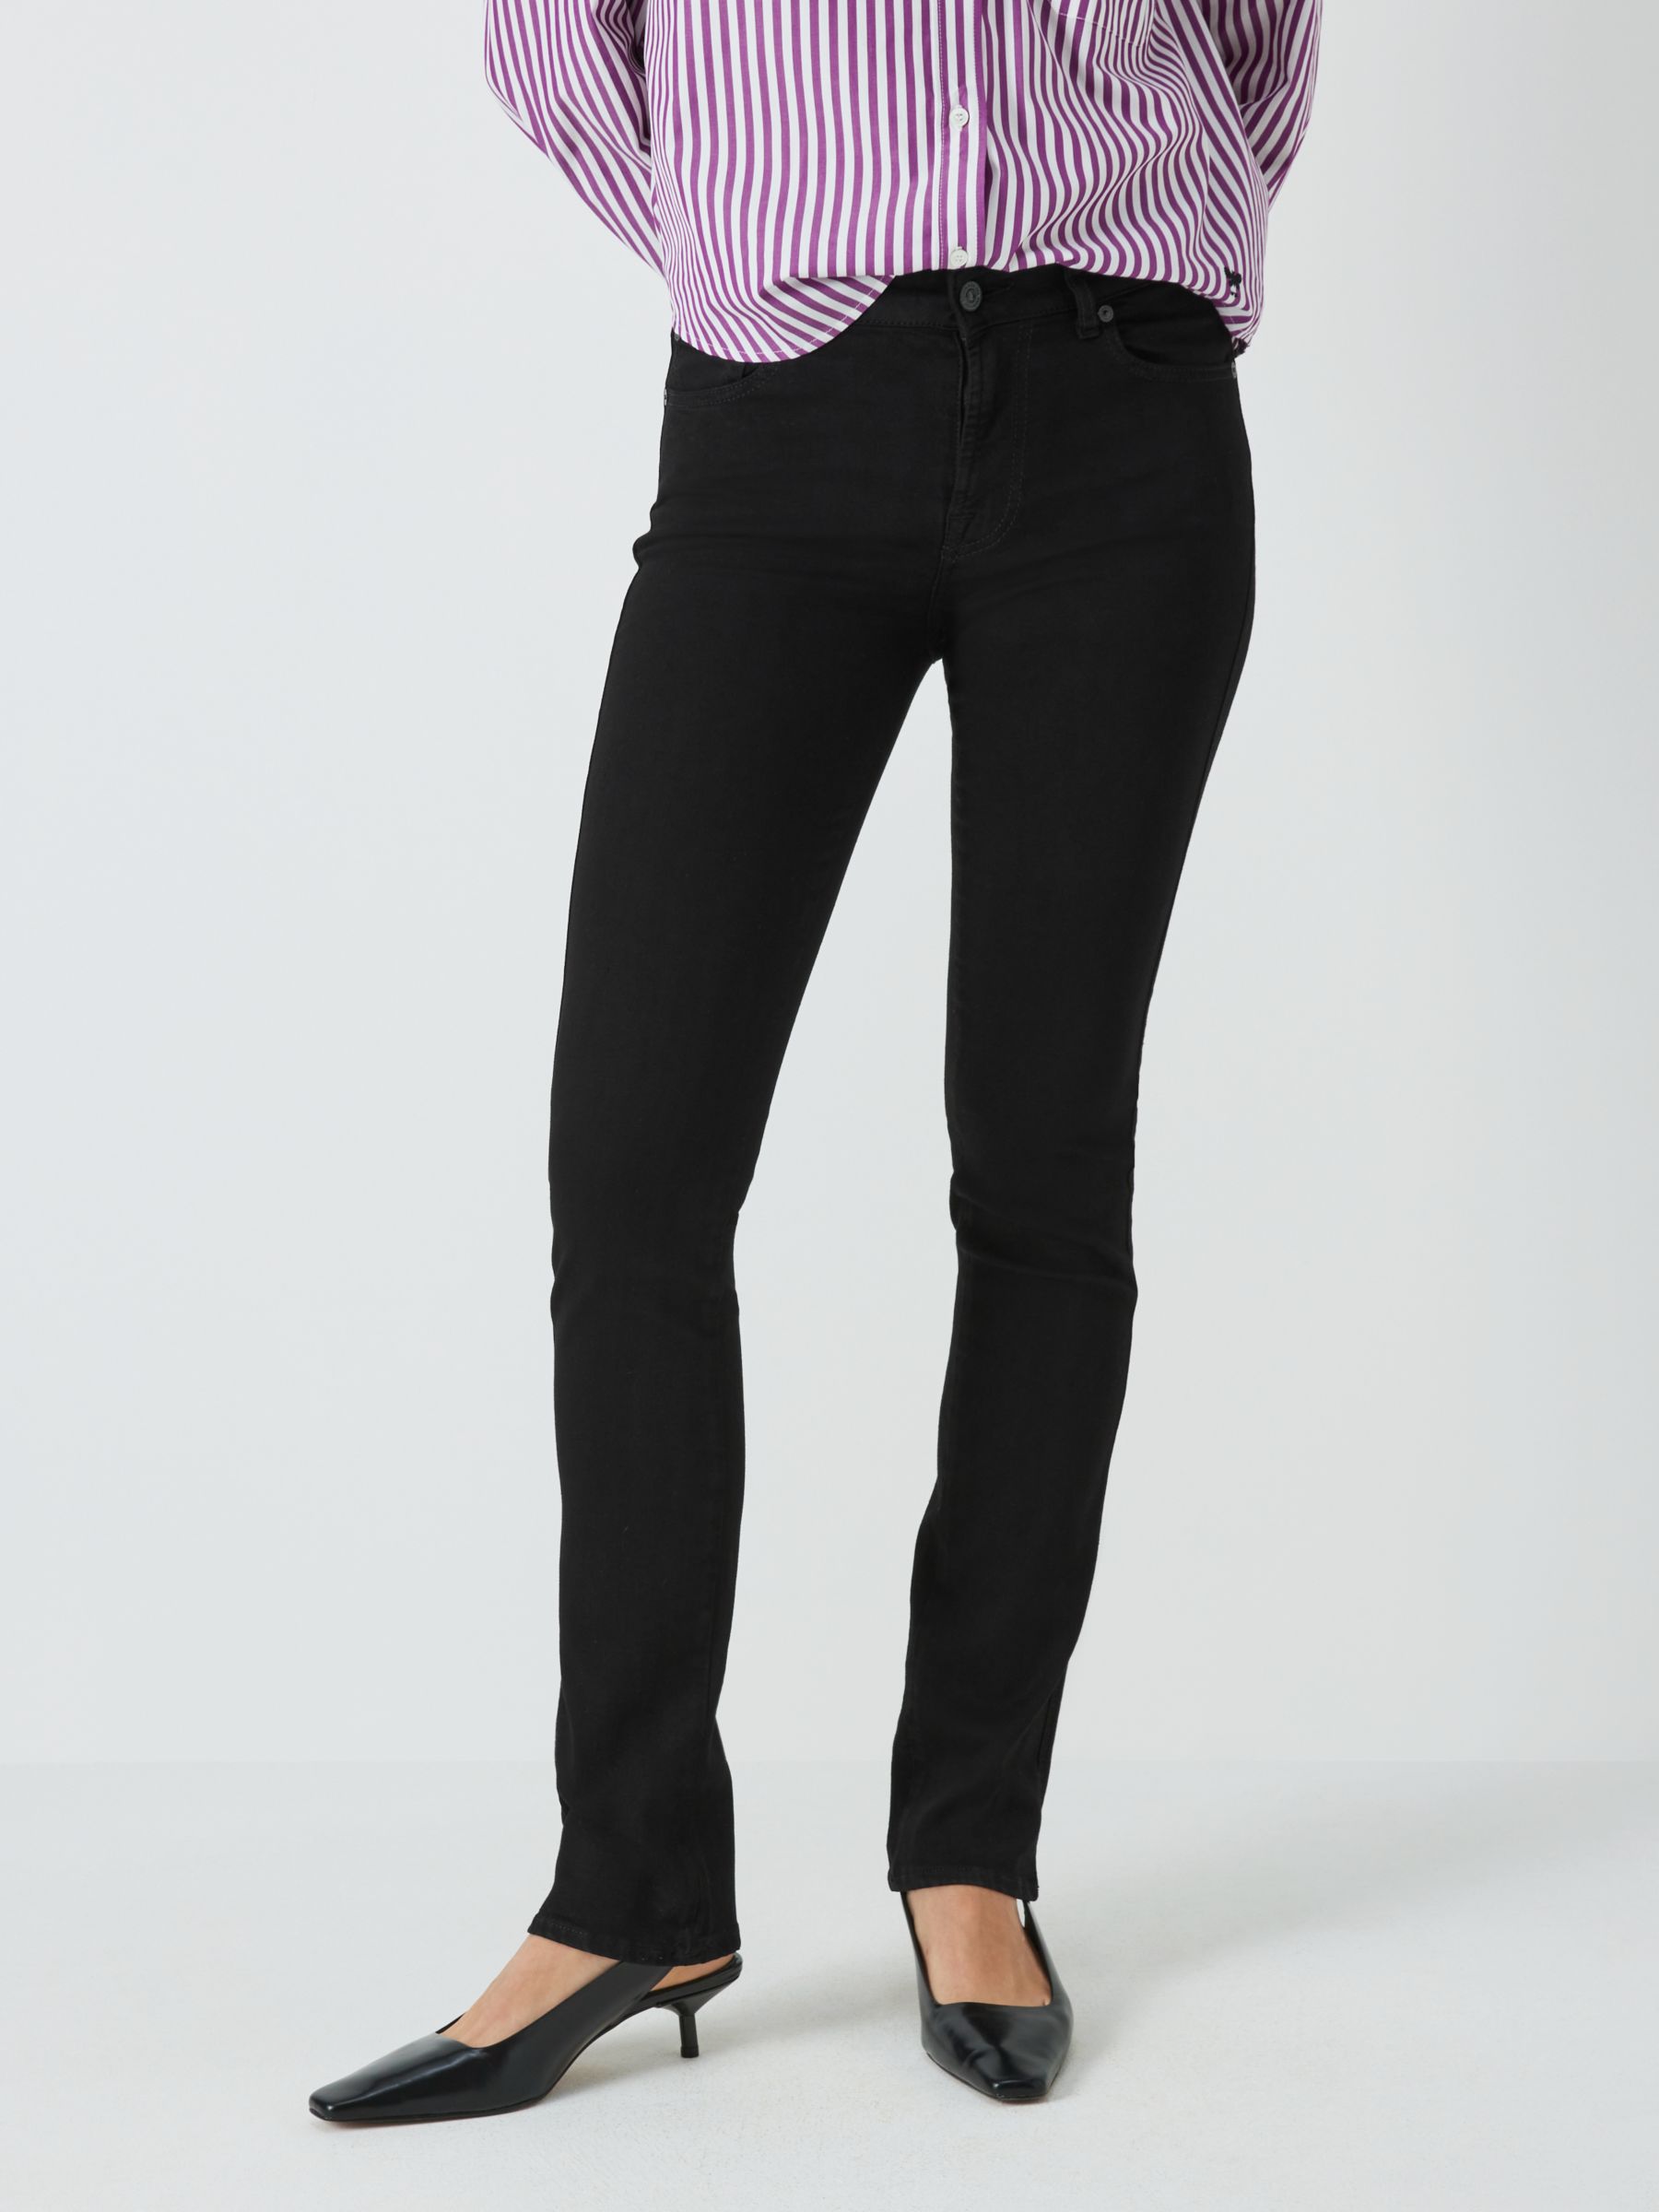 7 For All Mankind Kimmie B(Air) Jeans, Rinsed Black, 27